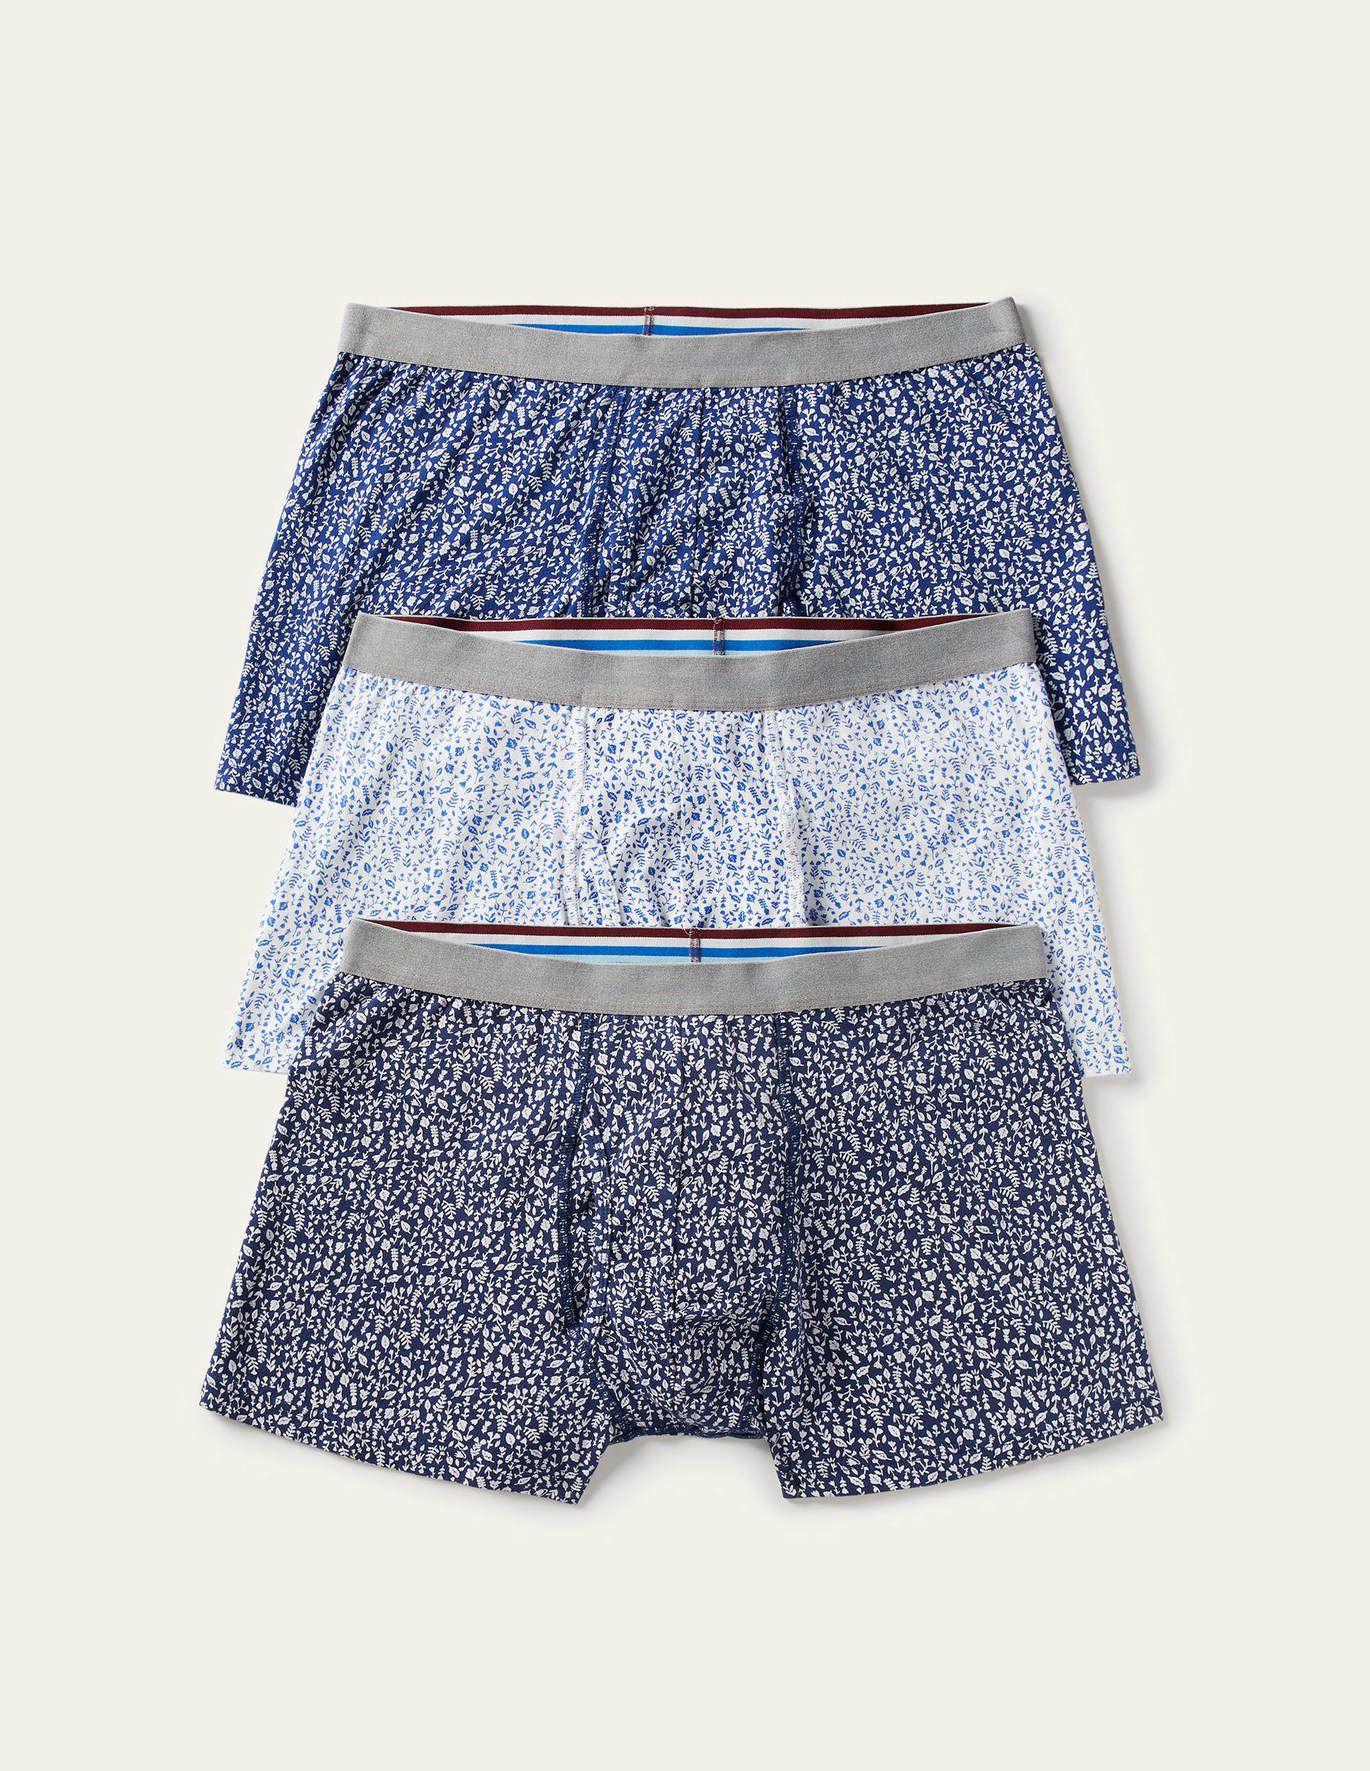 Boden 3 Pack Jersey Boxers - Blues Woodland Floral Pack